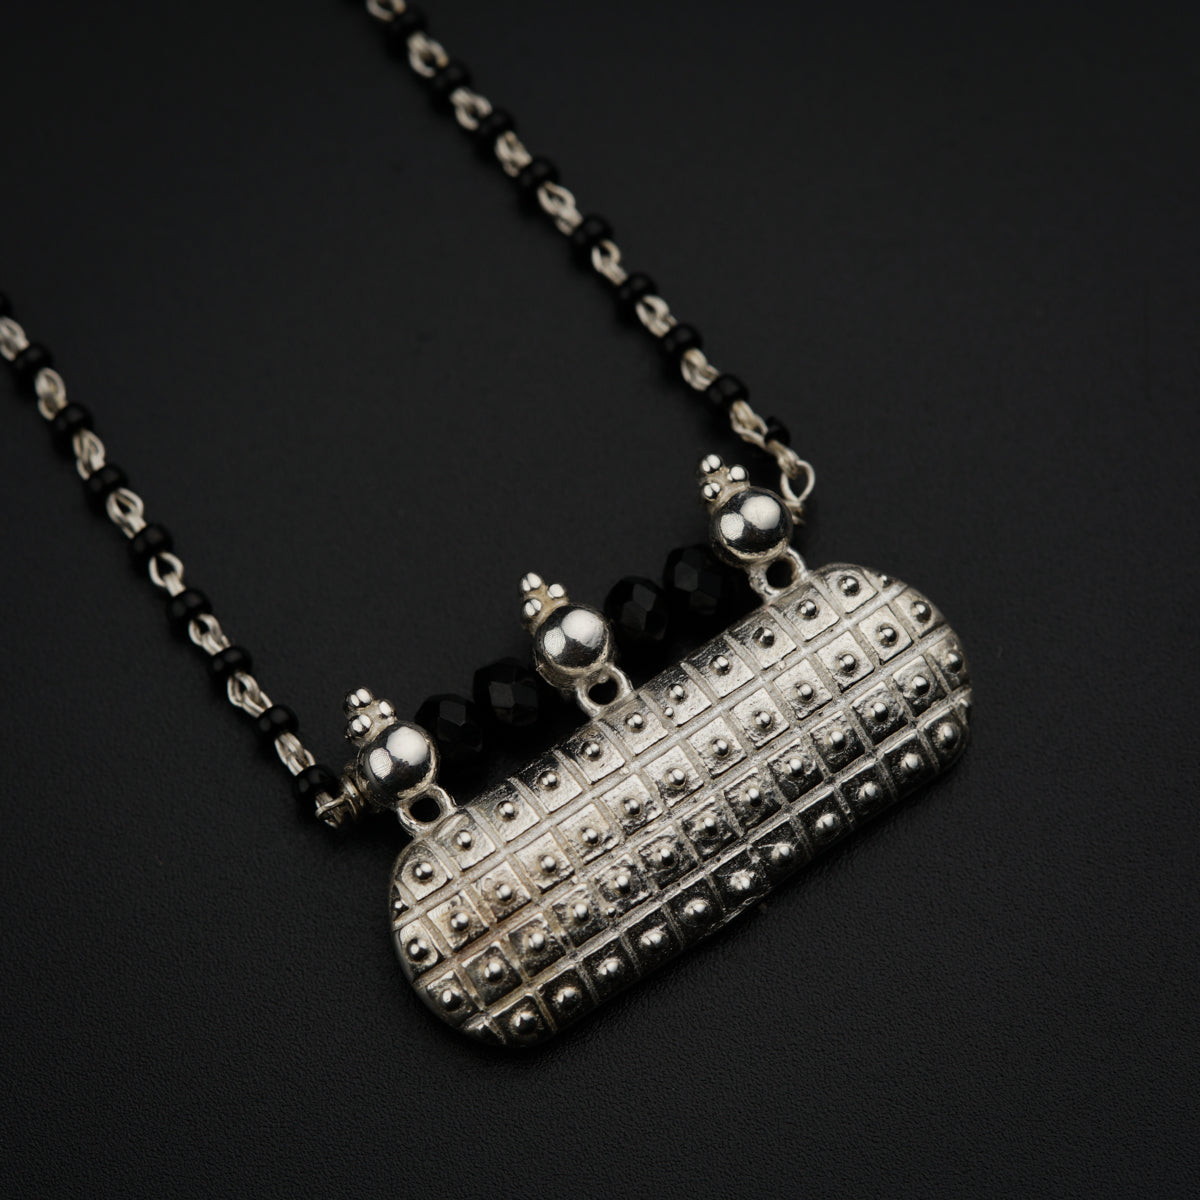 a necklace with a silver object on a black background